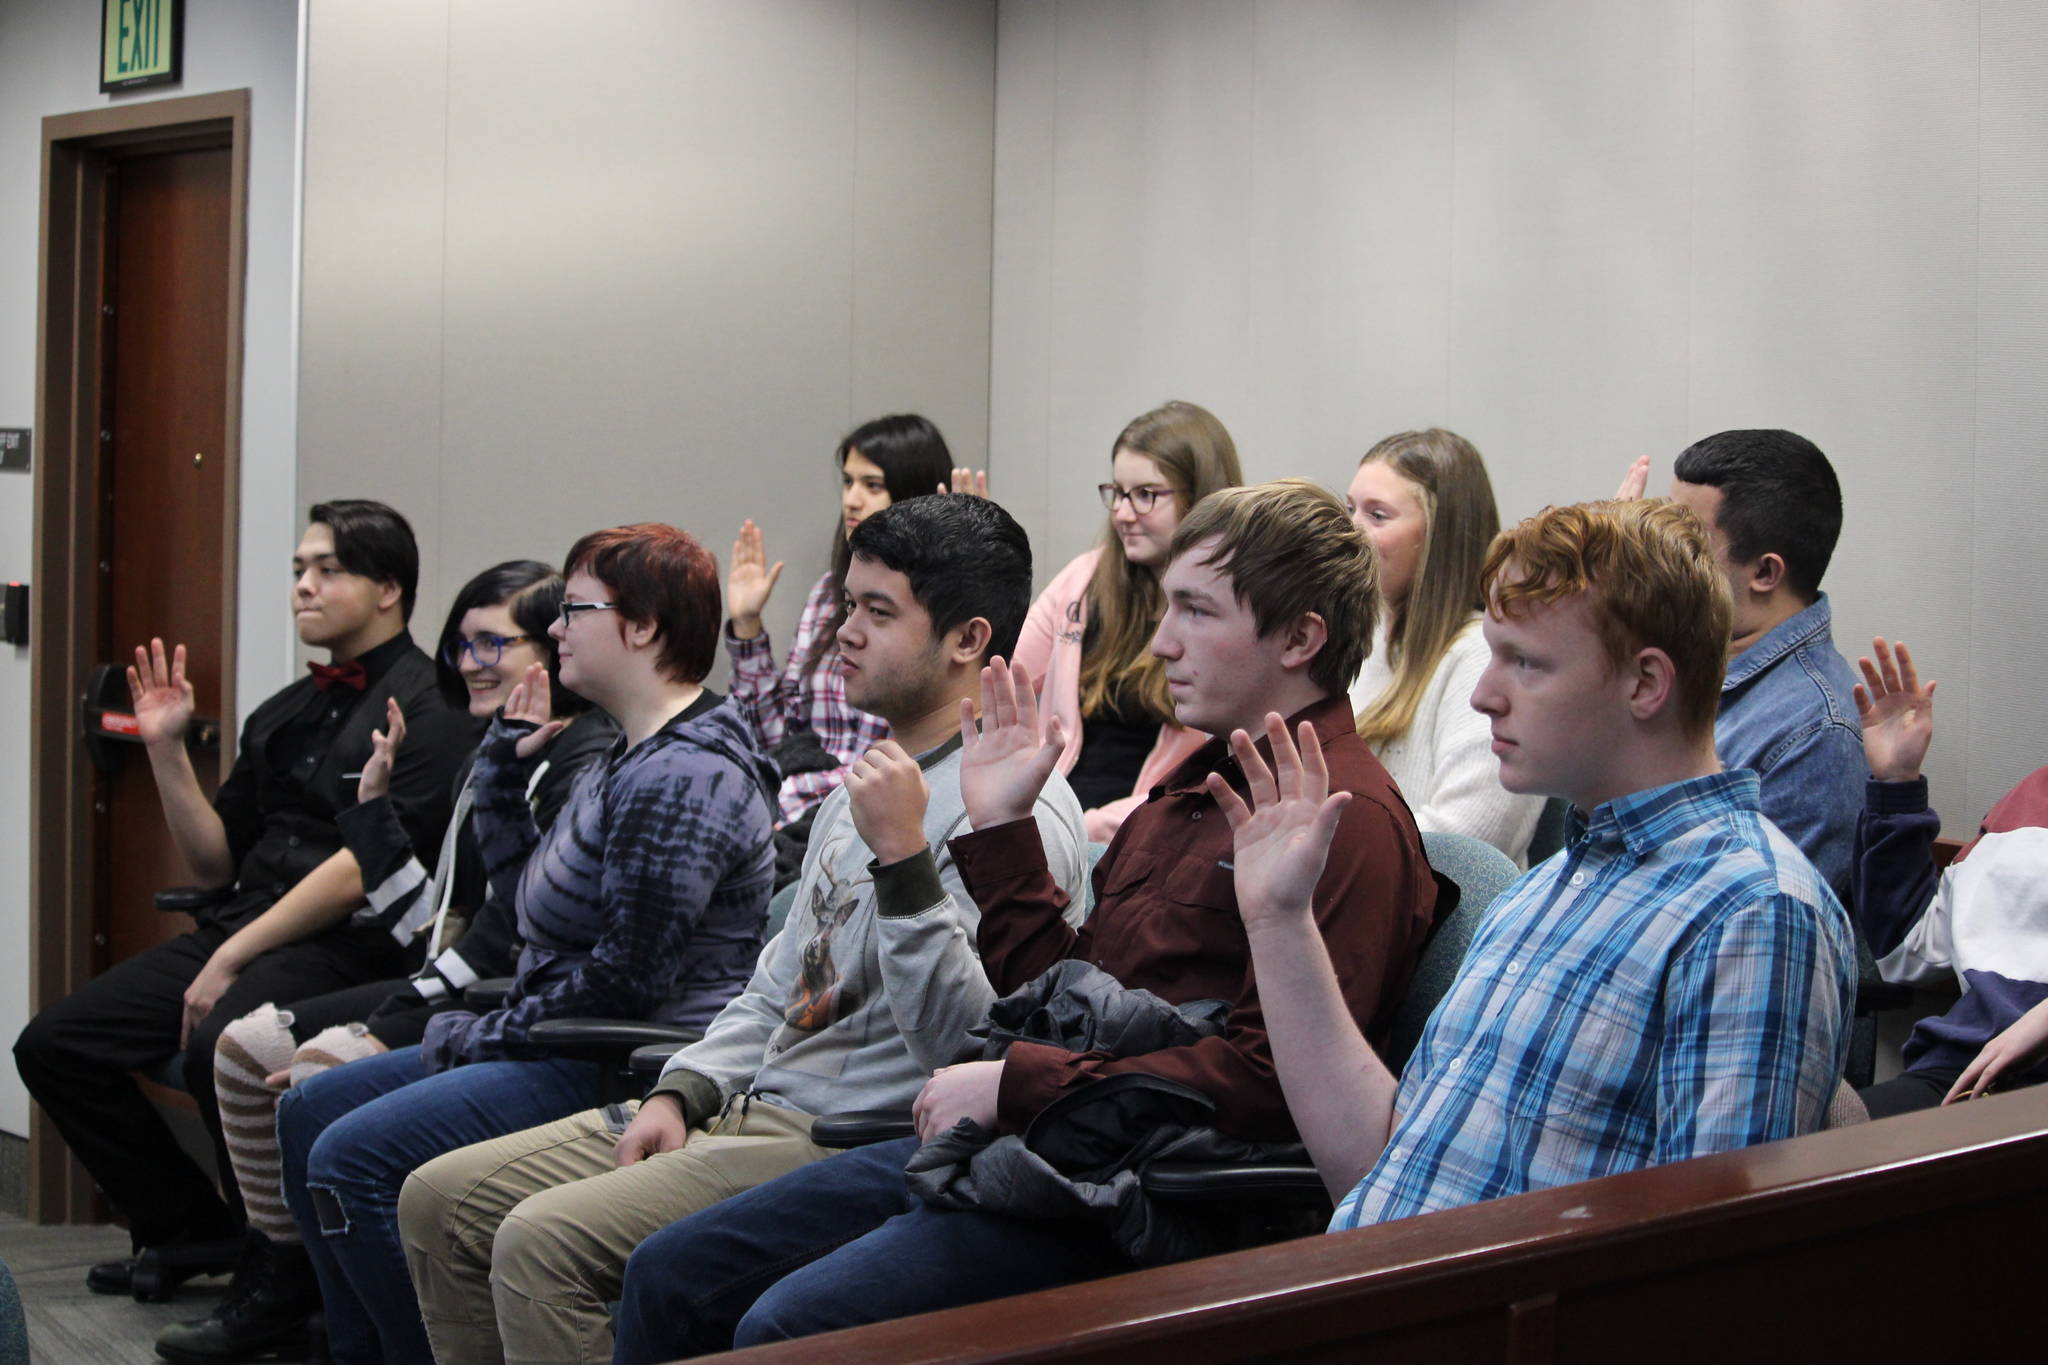 Nikiski Middle/High School seniors are sworn in as the jury during a mock trial at the Kenai Courthouse on Dec. 3, 2019. (Photo by Brian Mazurek/Peninsula Clarion)